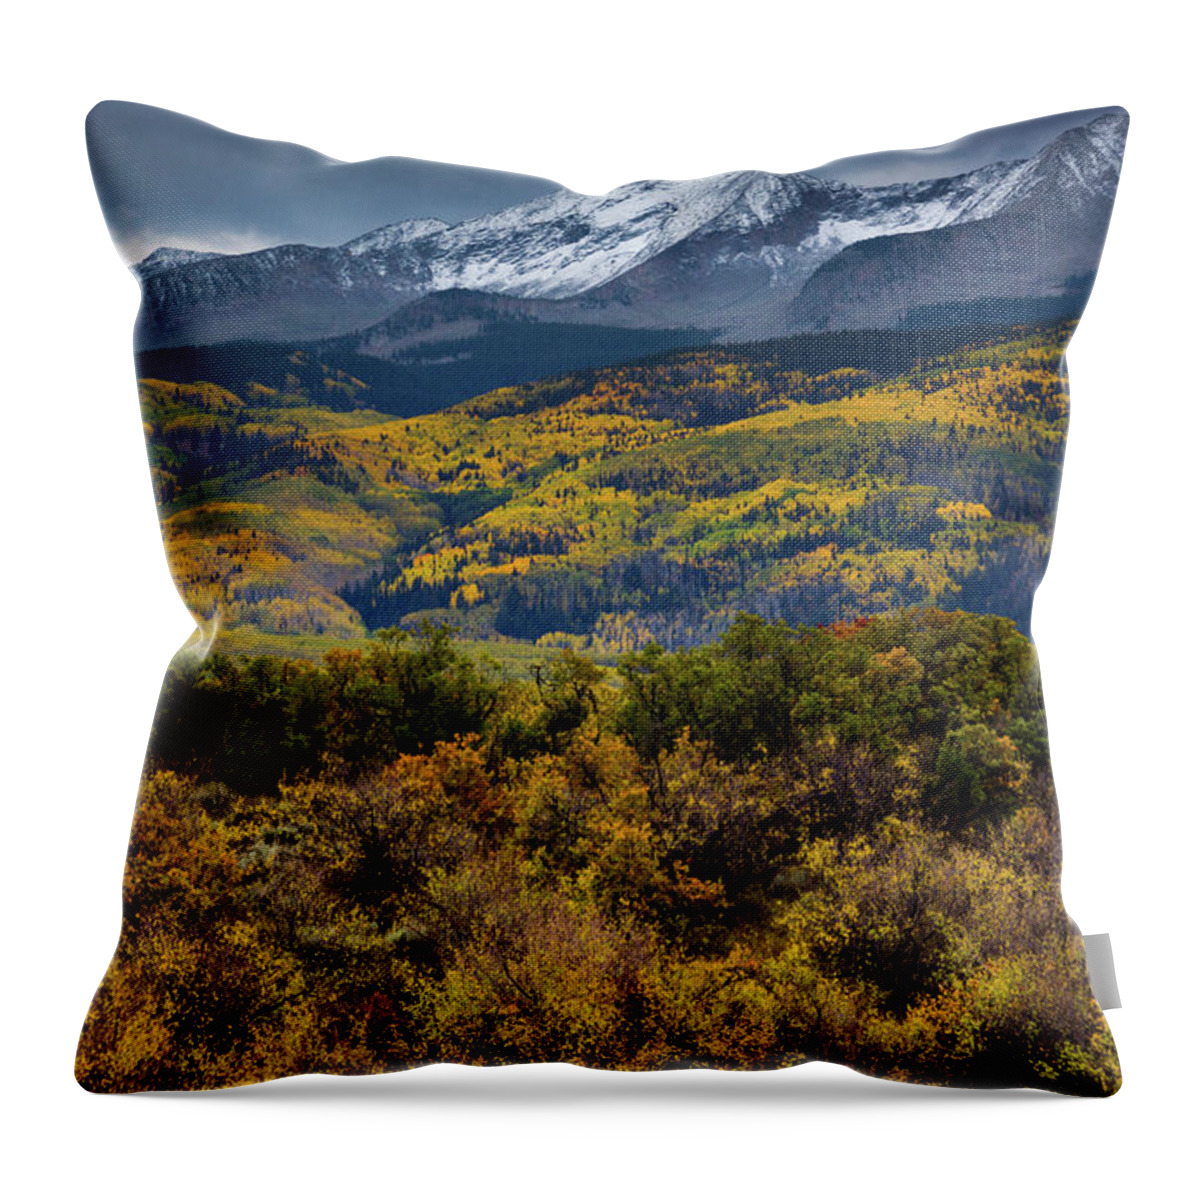 America Throw Pillow featuring the photograph Autumn Snow Clouds Over West Beckwith by John De Bord